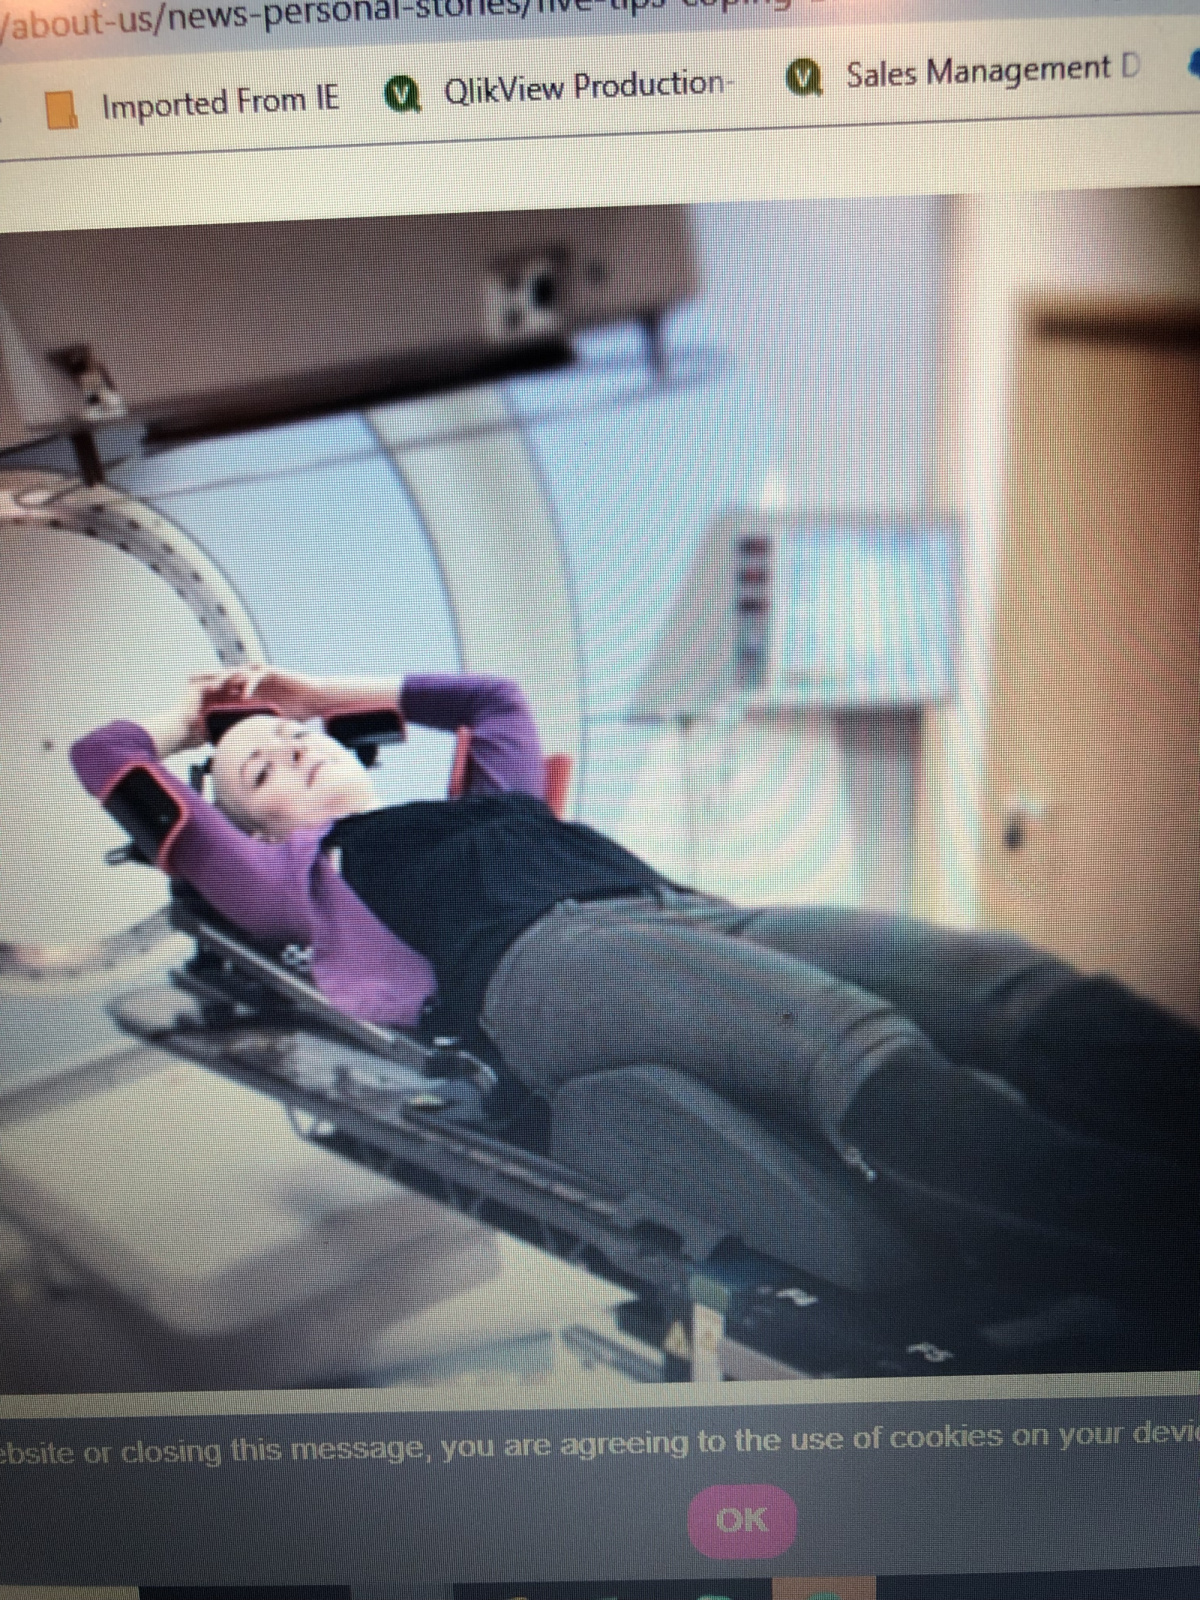 This shows how you lay in the machine.   They put the warm blankie around your arm and head like a “u” from elbow to elbow like a nice warm hug.  